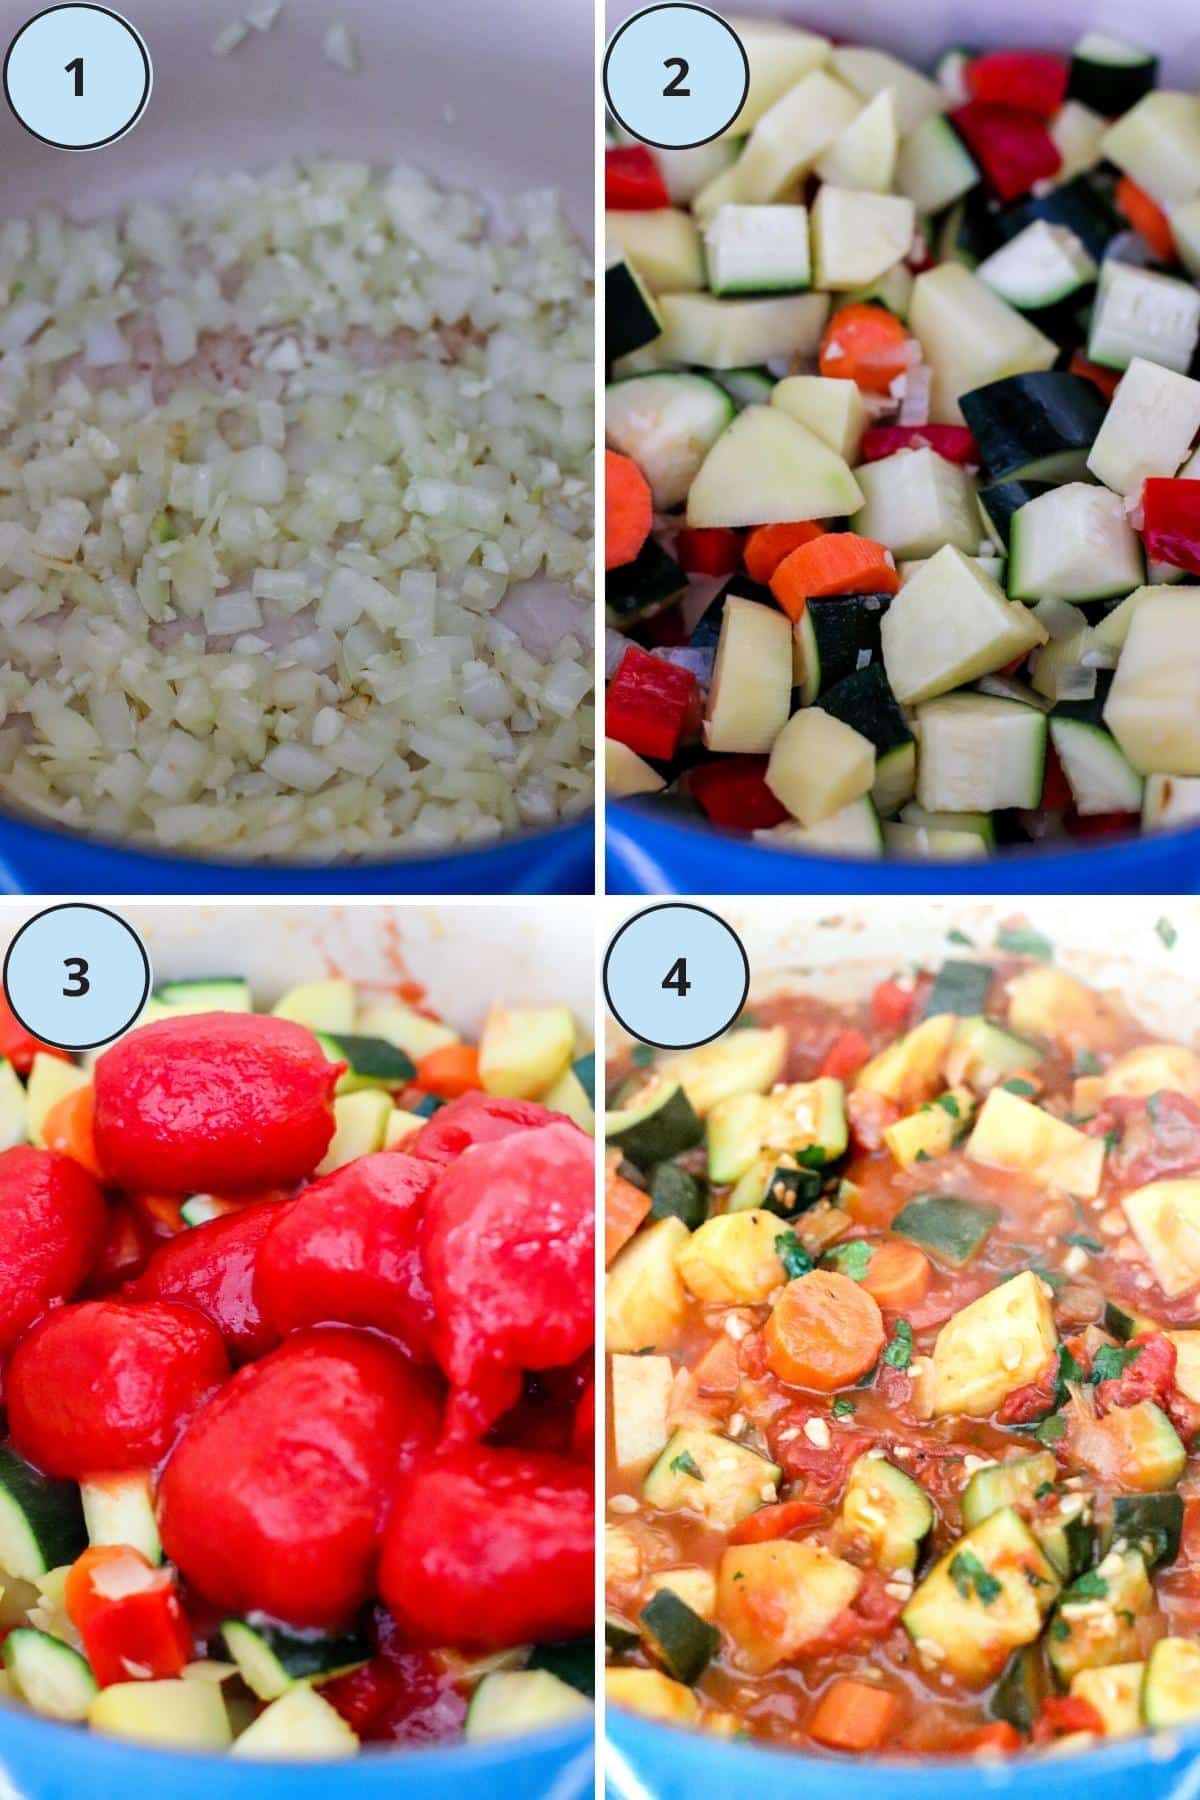 Collage of 4 numbered images showing how to make this recipe.